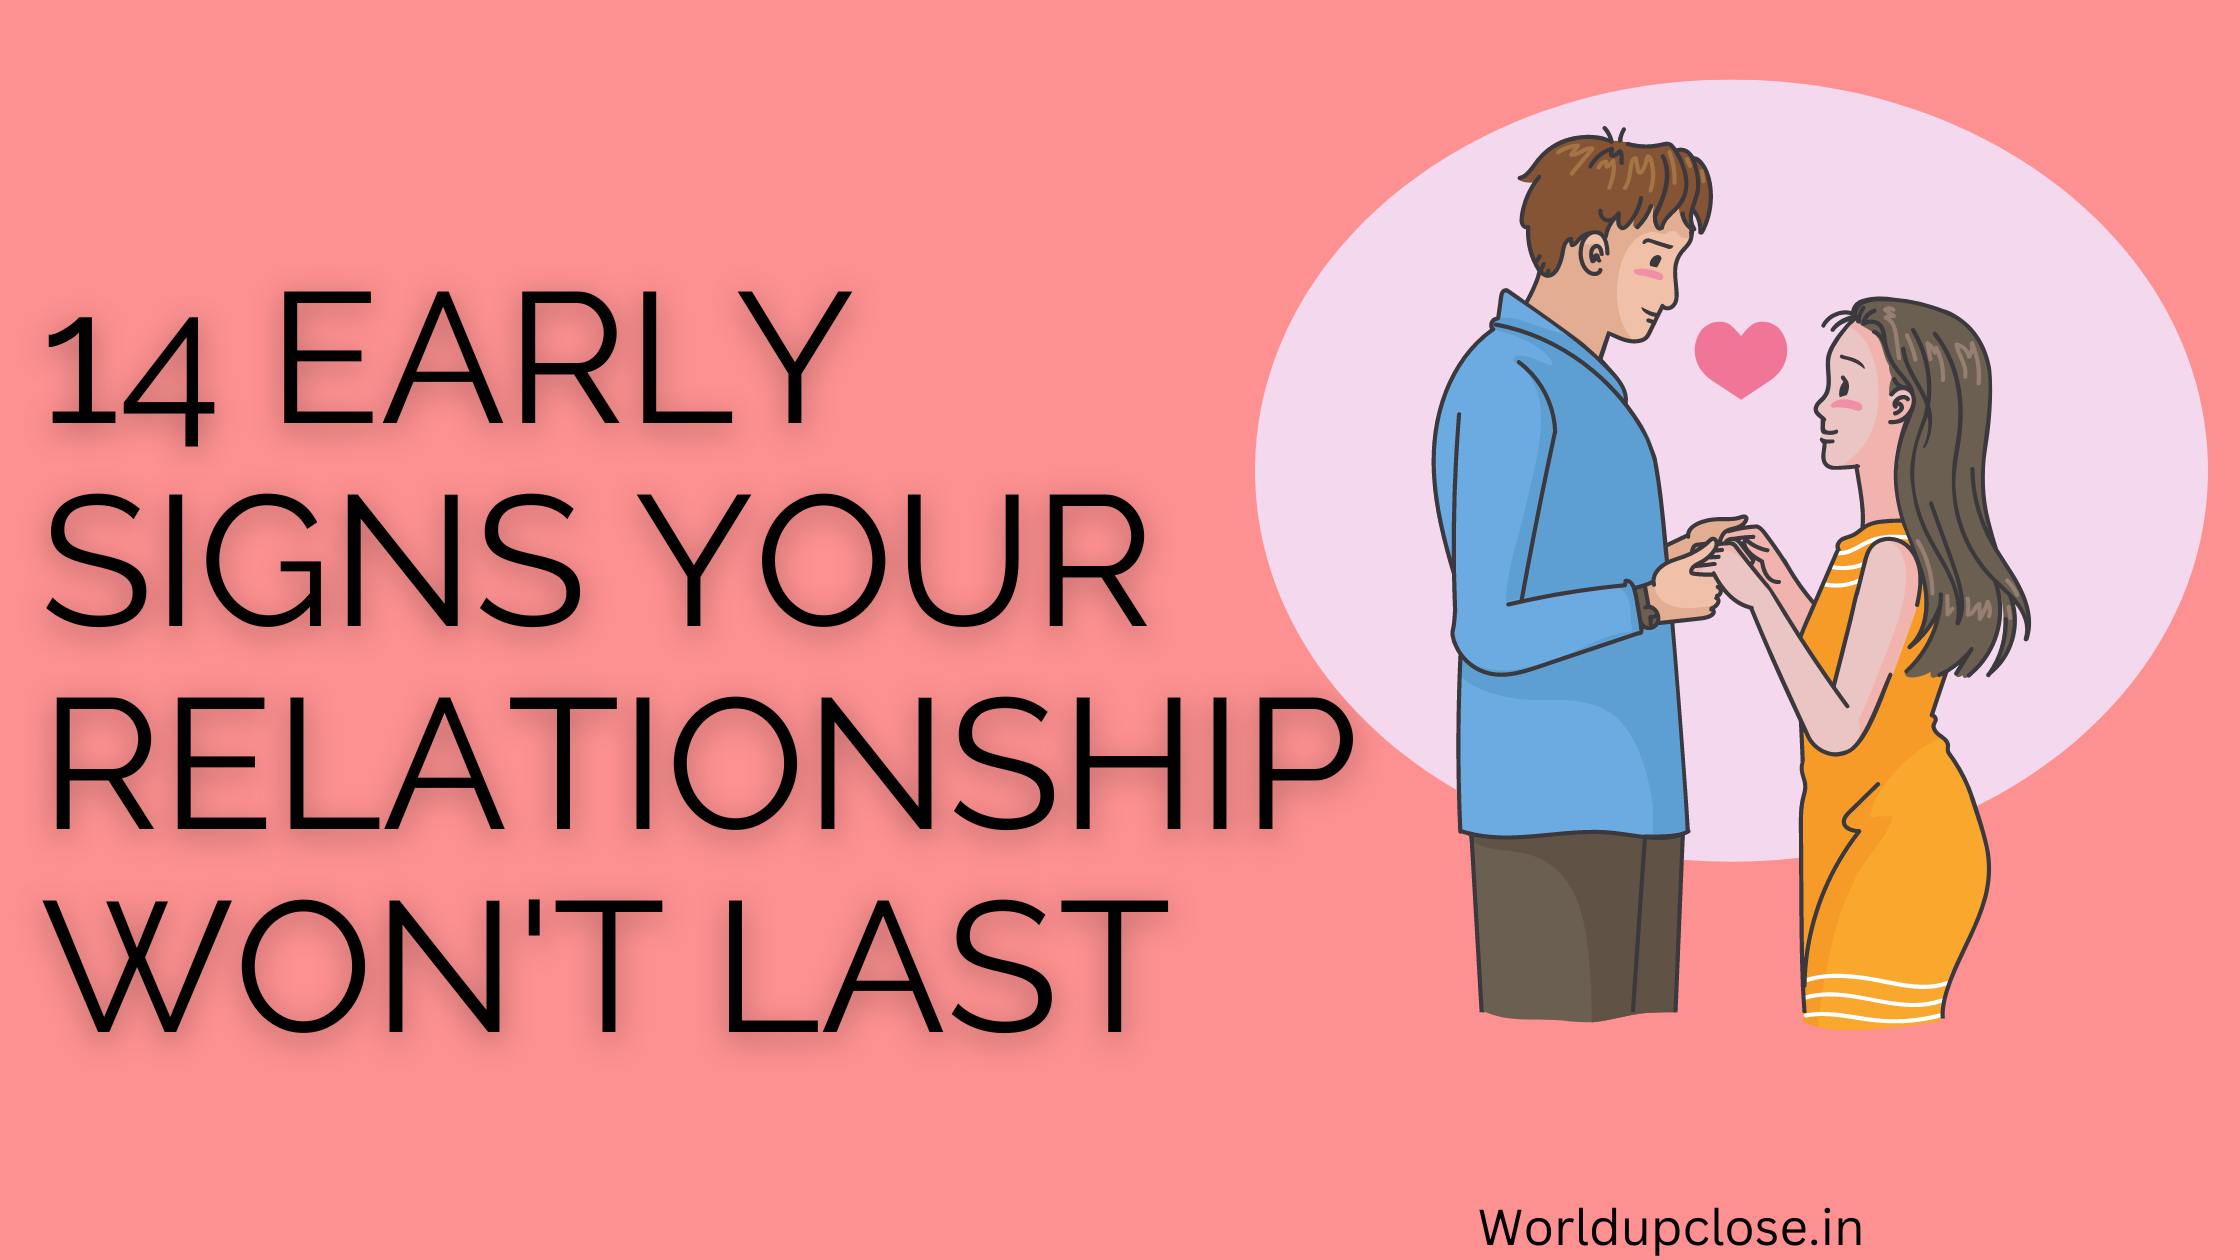 14 Early Signs Your Relationship Won't Last 49